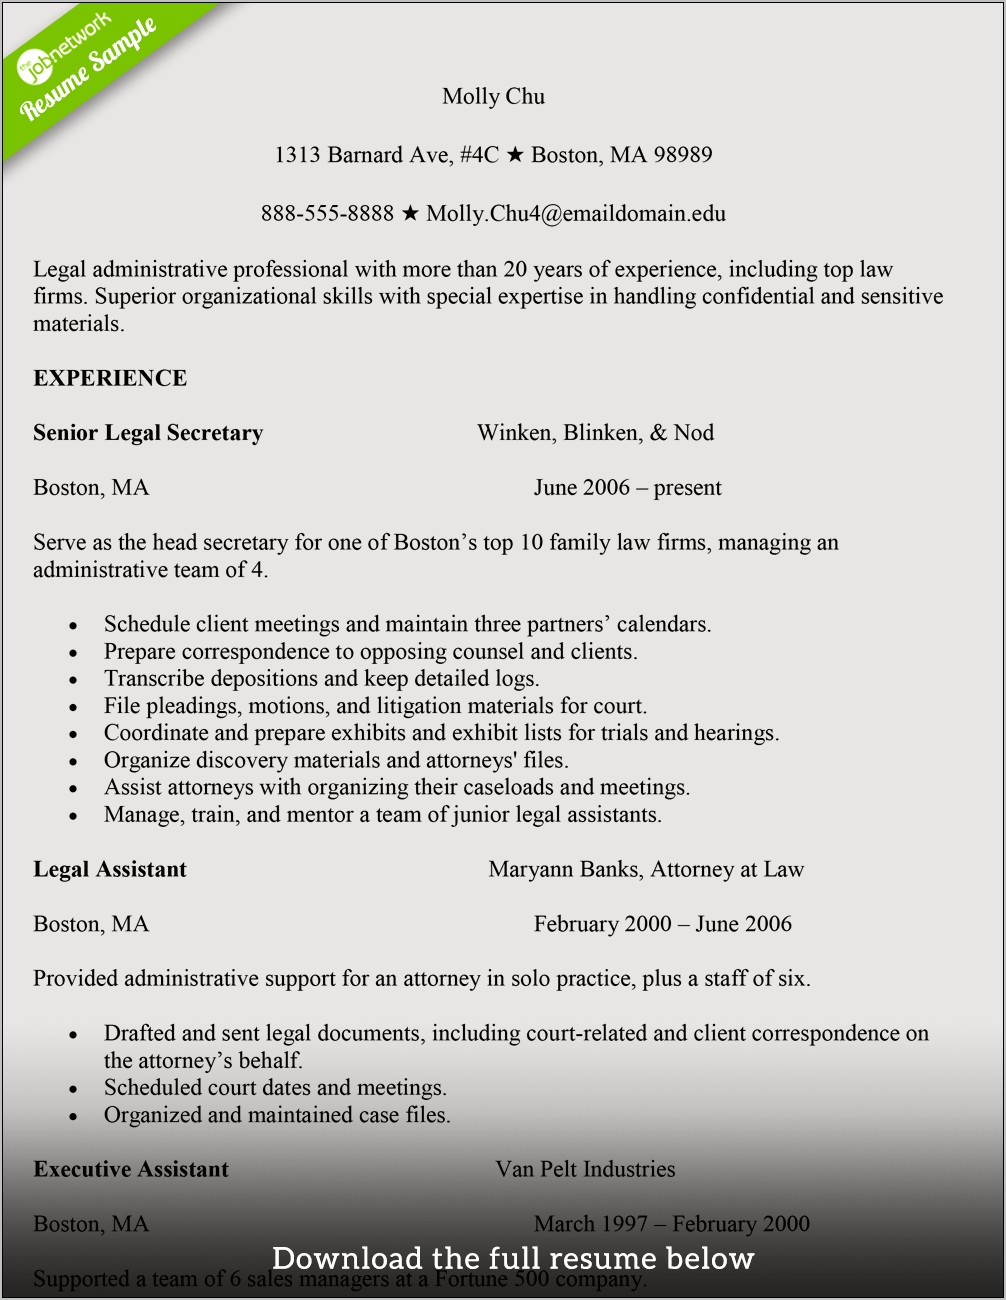 Resume Objective Examples For Legal Assistant